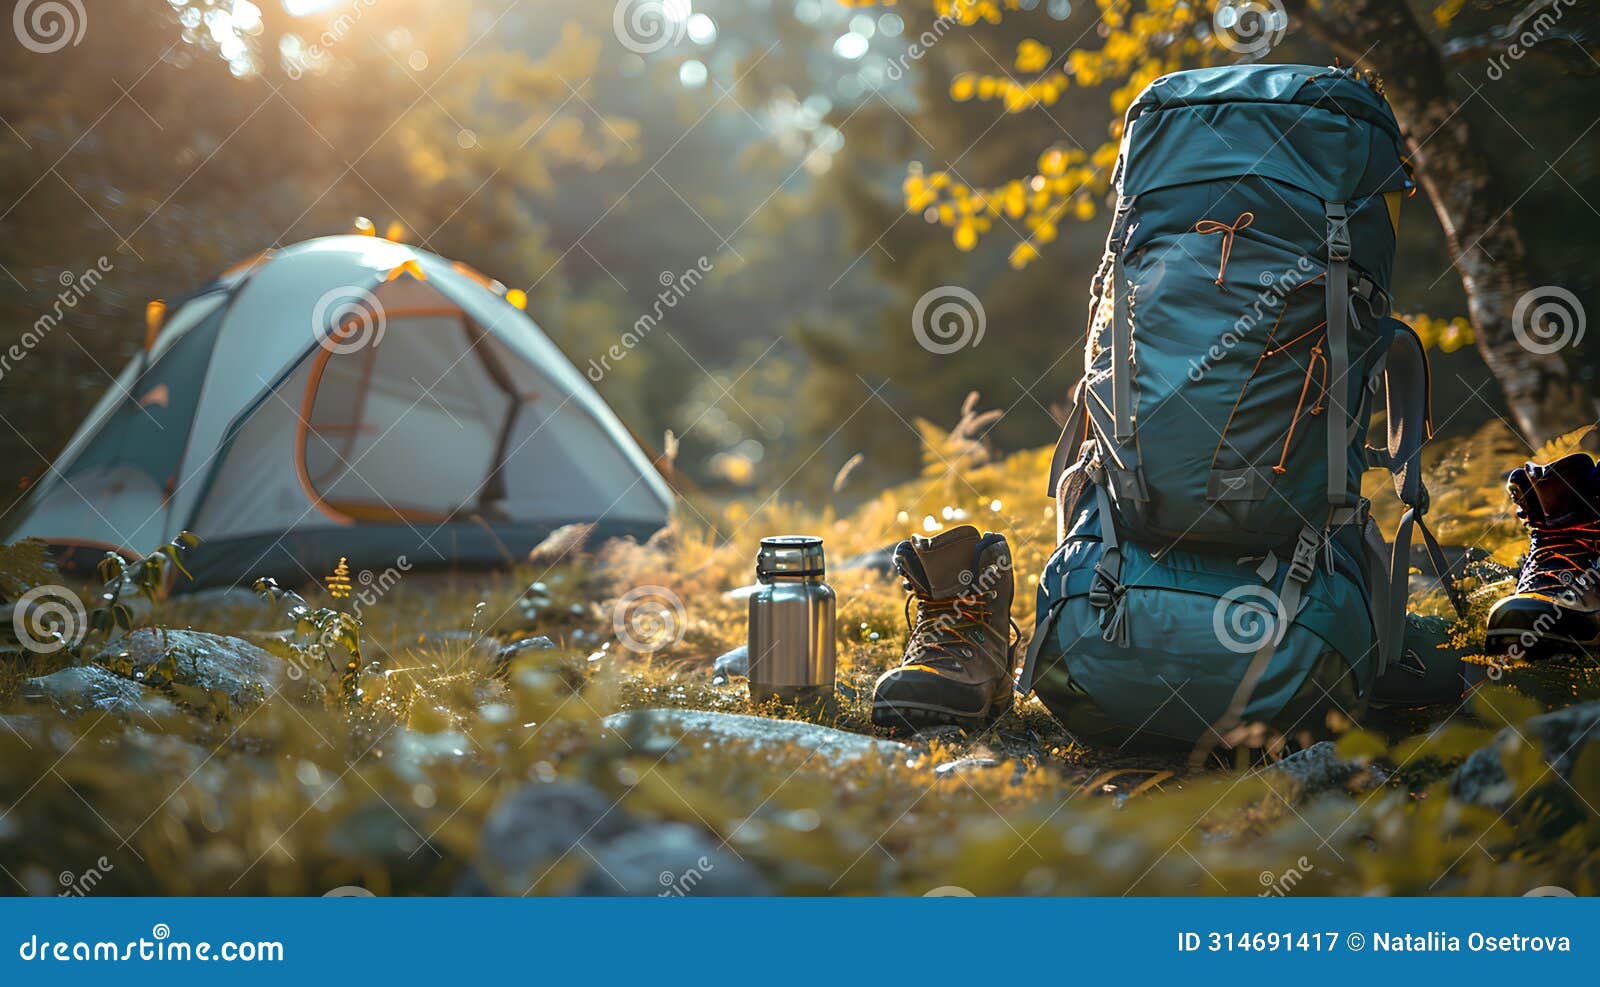 camping in the mountains, tent, backpack and water bottle. oneness with nature